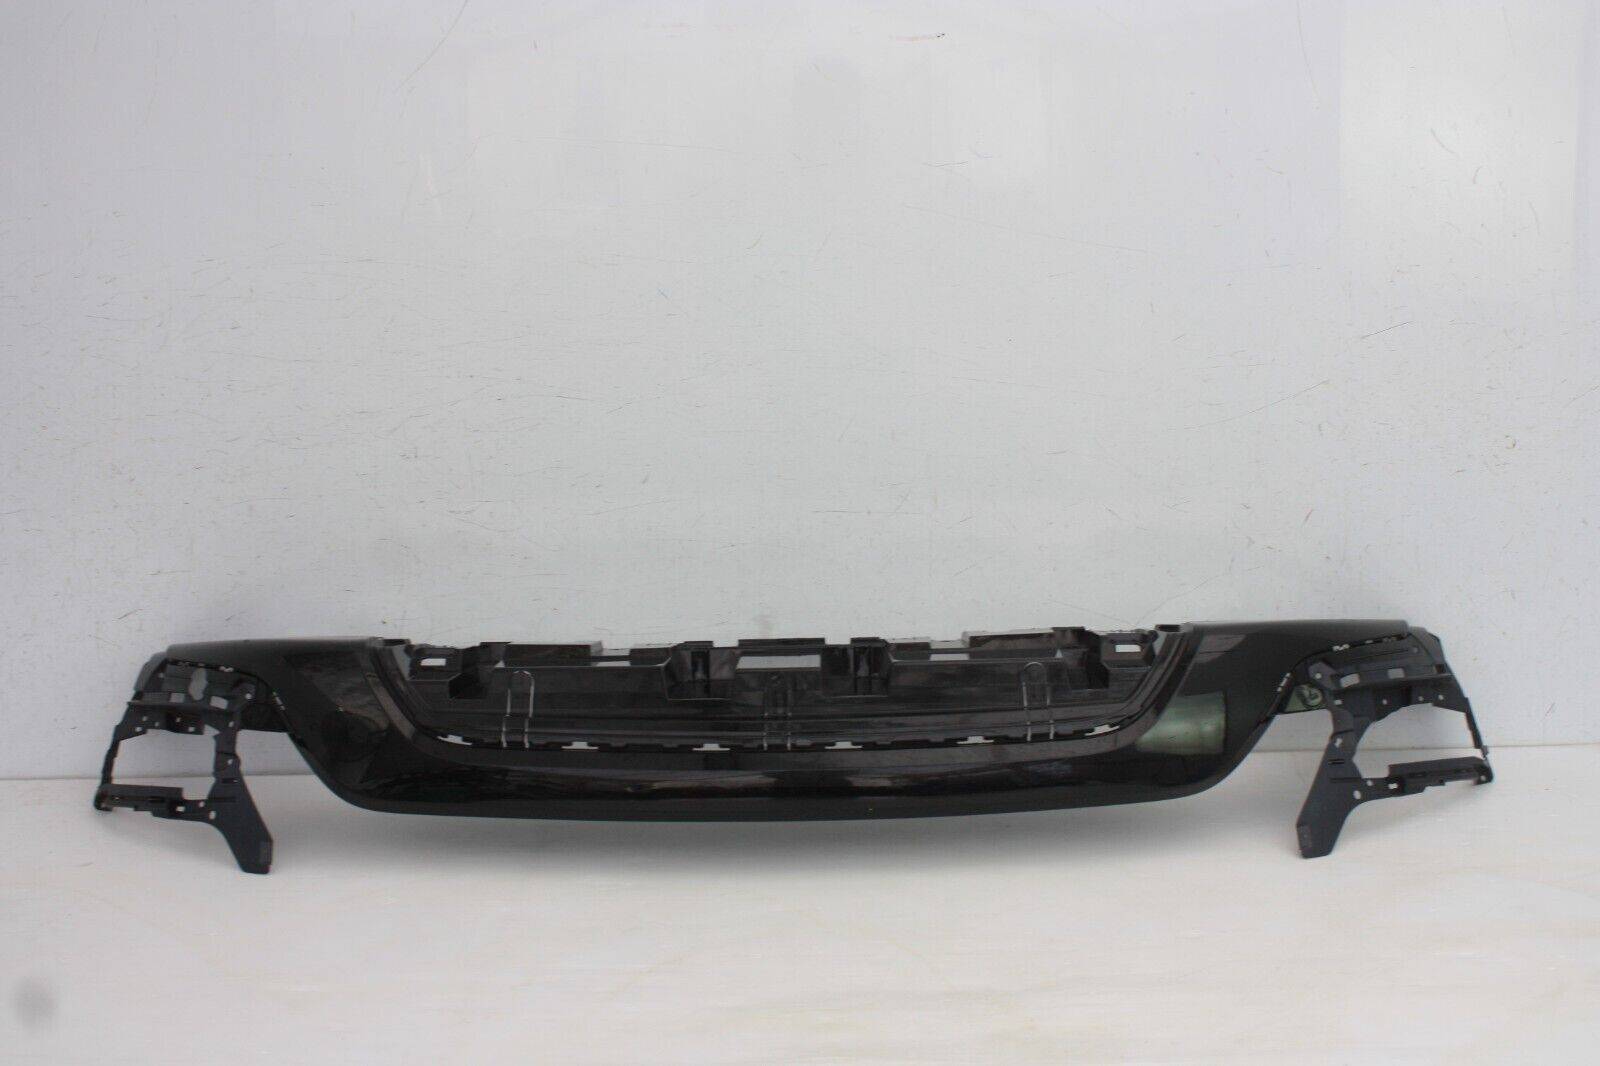 Range Rover Evoque Dynamic Front Bumper Lower Section 2019 ON Genuine 175374731816